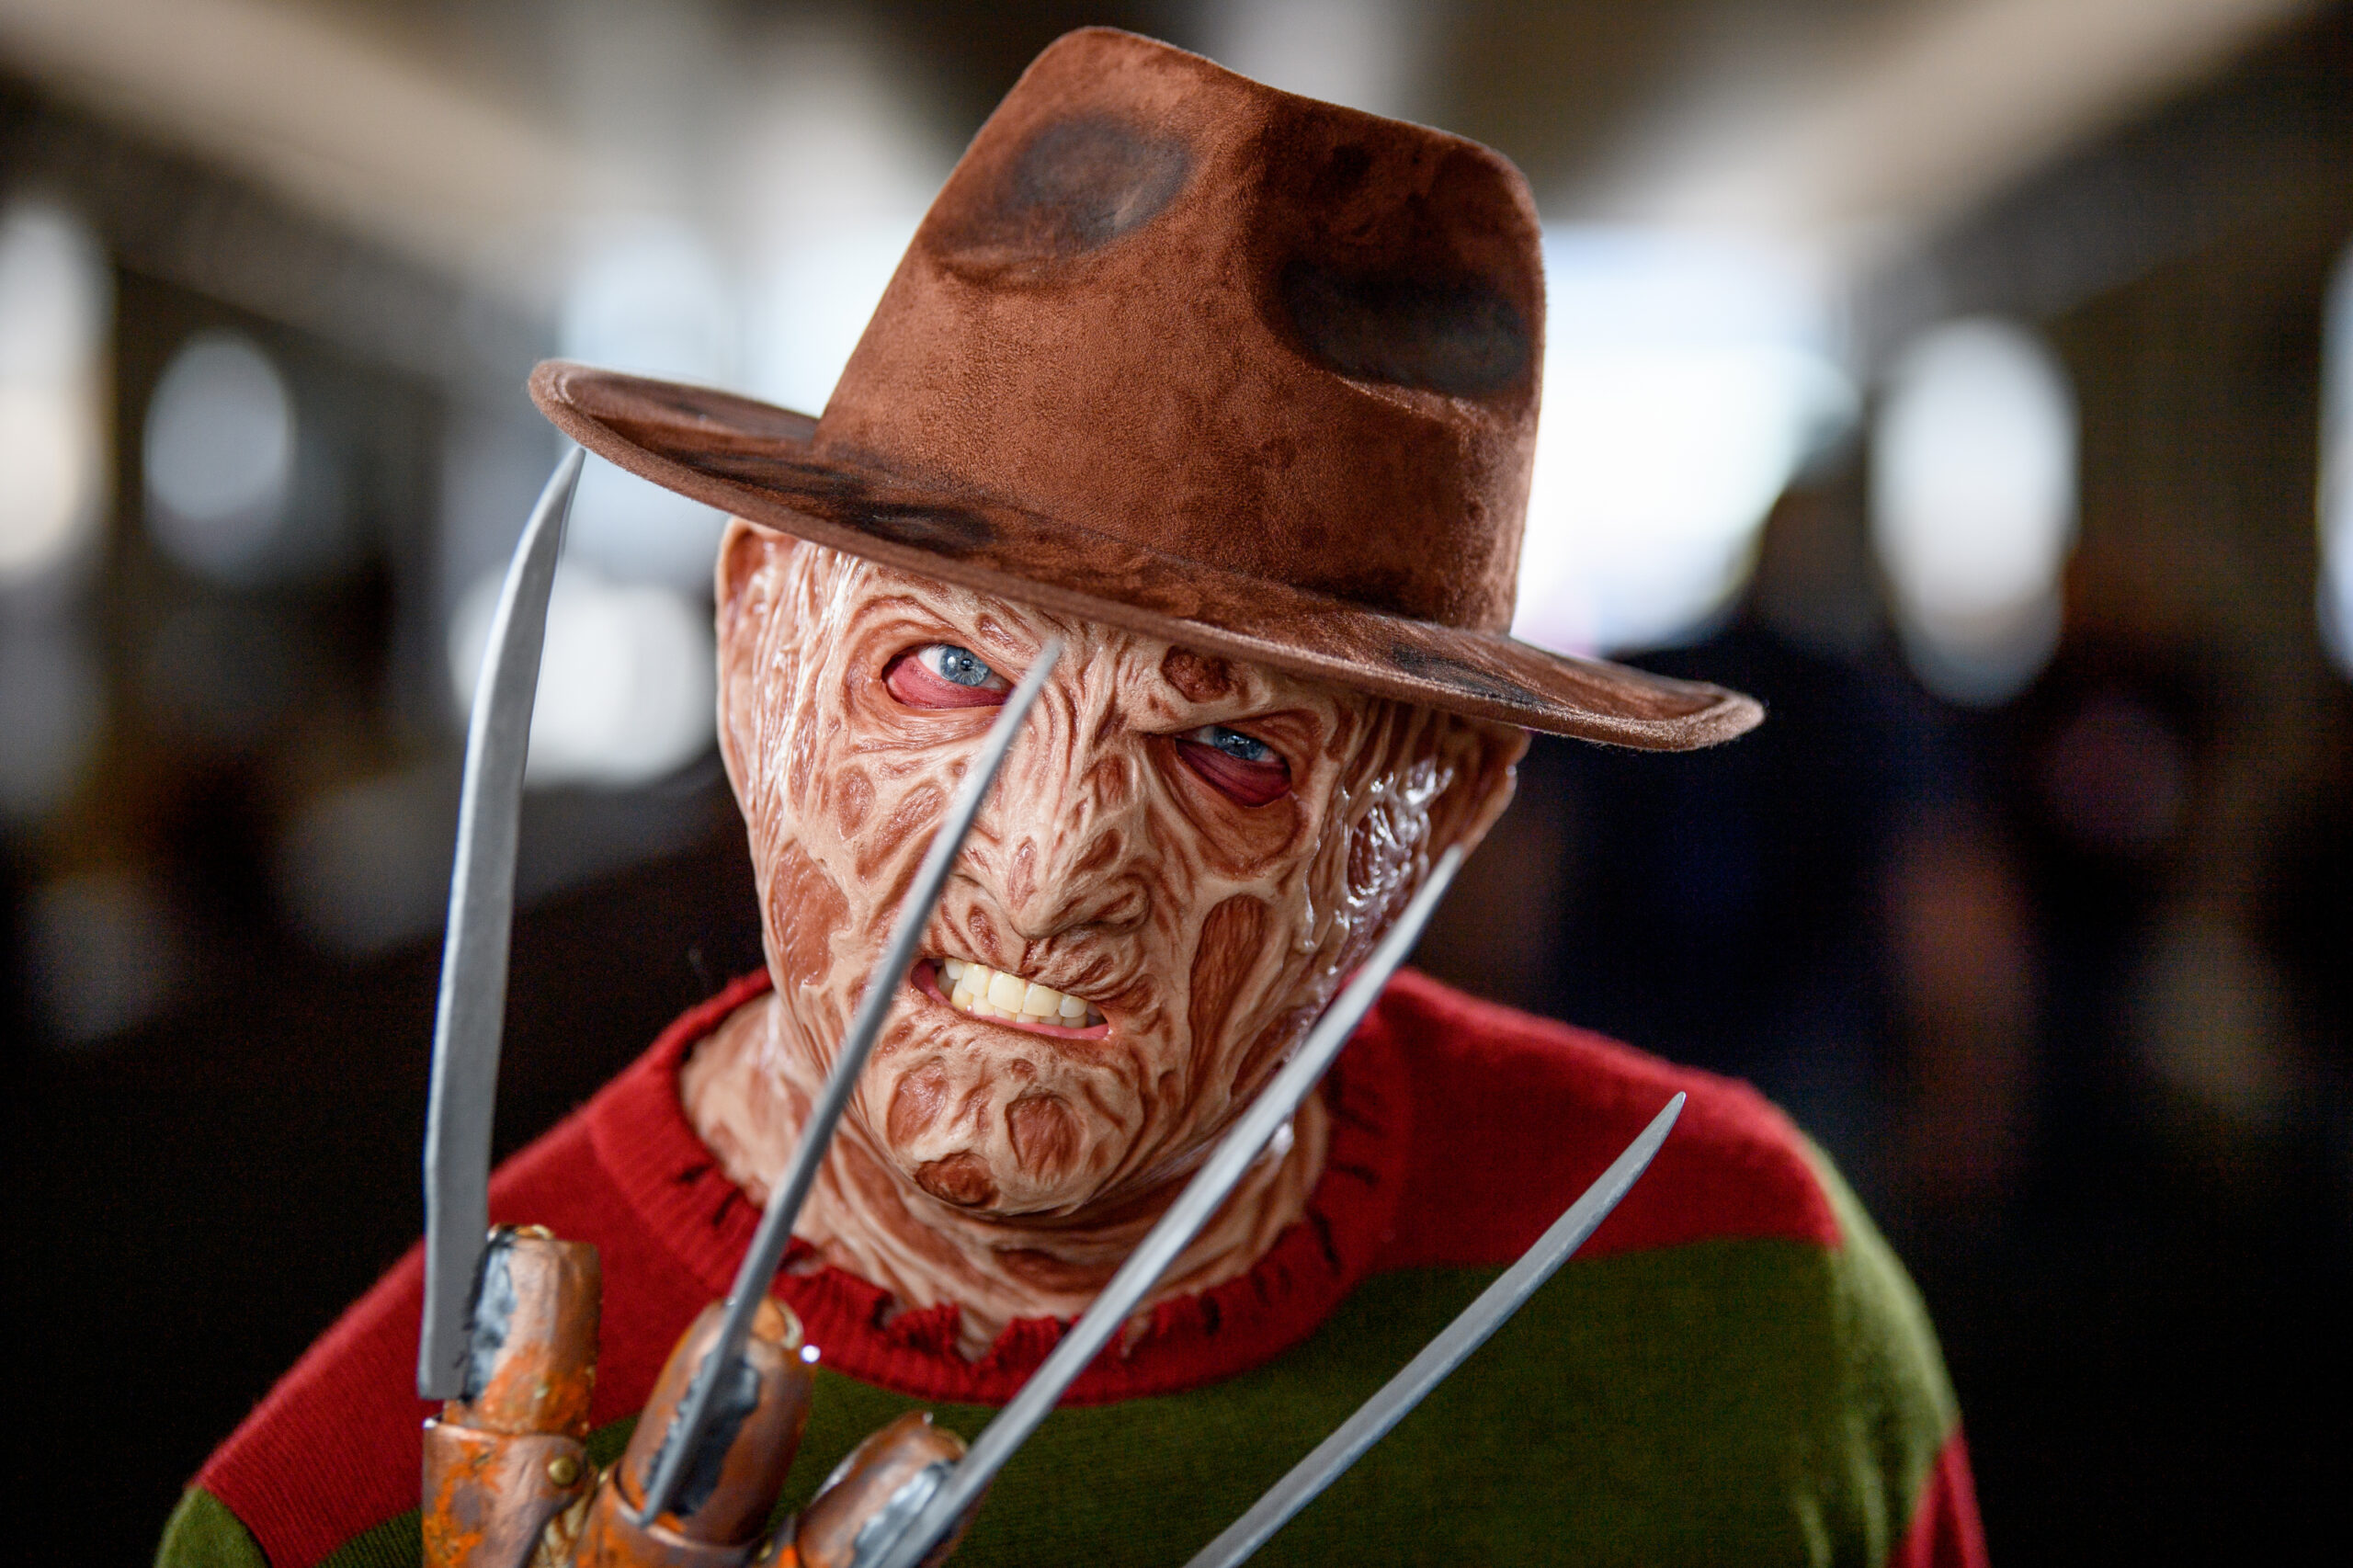 NEW YORK, NEW YORK - OCTOBER 07: A cosplayer dressed as Freddy Krueger from 